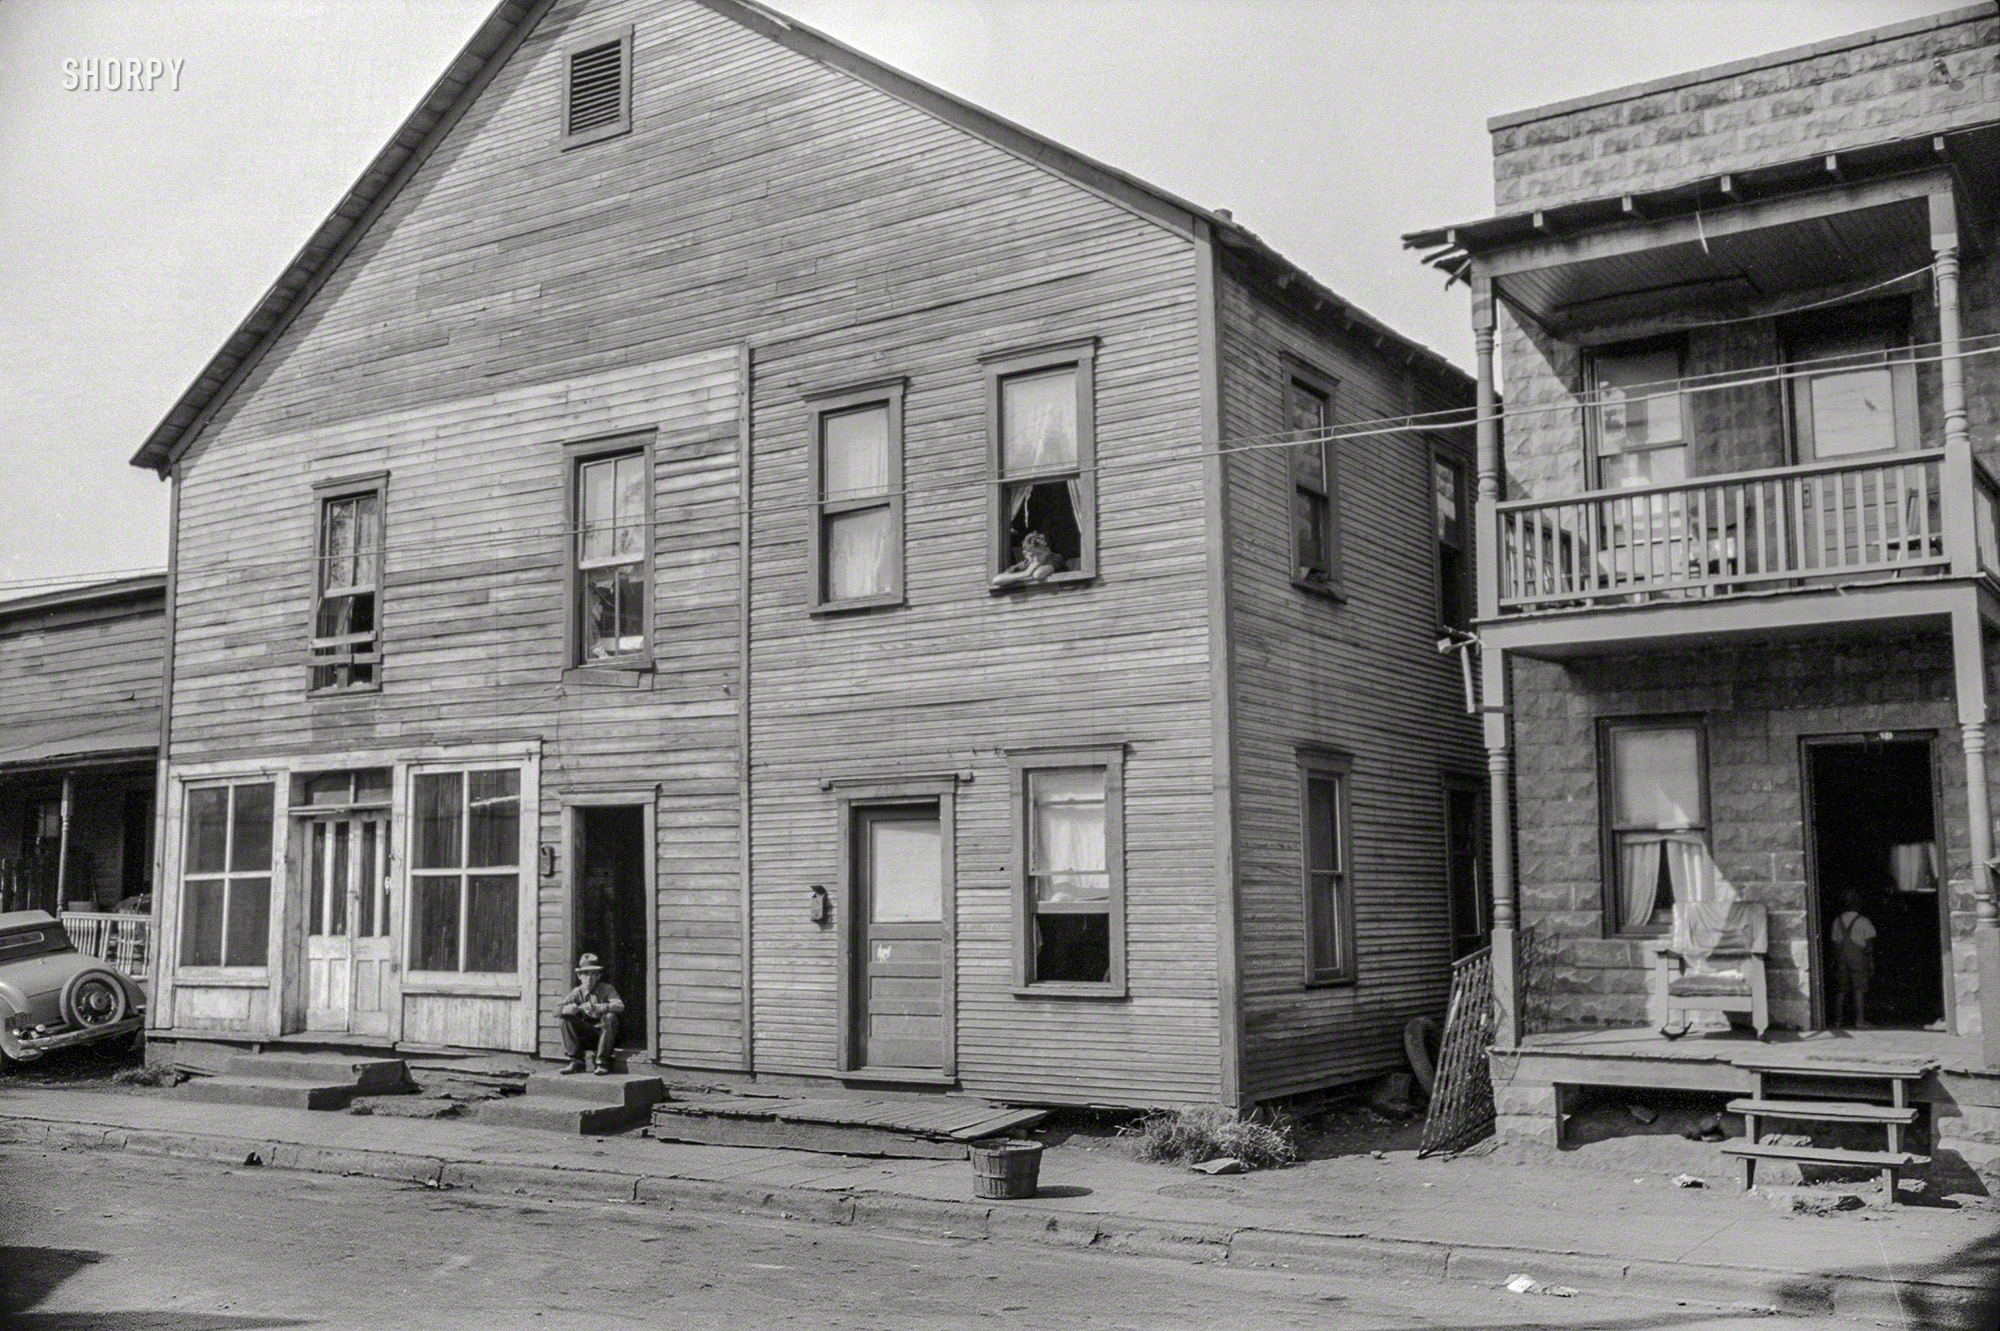 September 1938. "House, Negro and white section, Charleston, West Virginia." 35mm nitrate negative by Marion Post Wolcott. View full size.